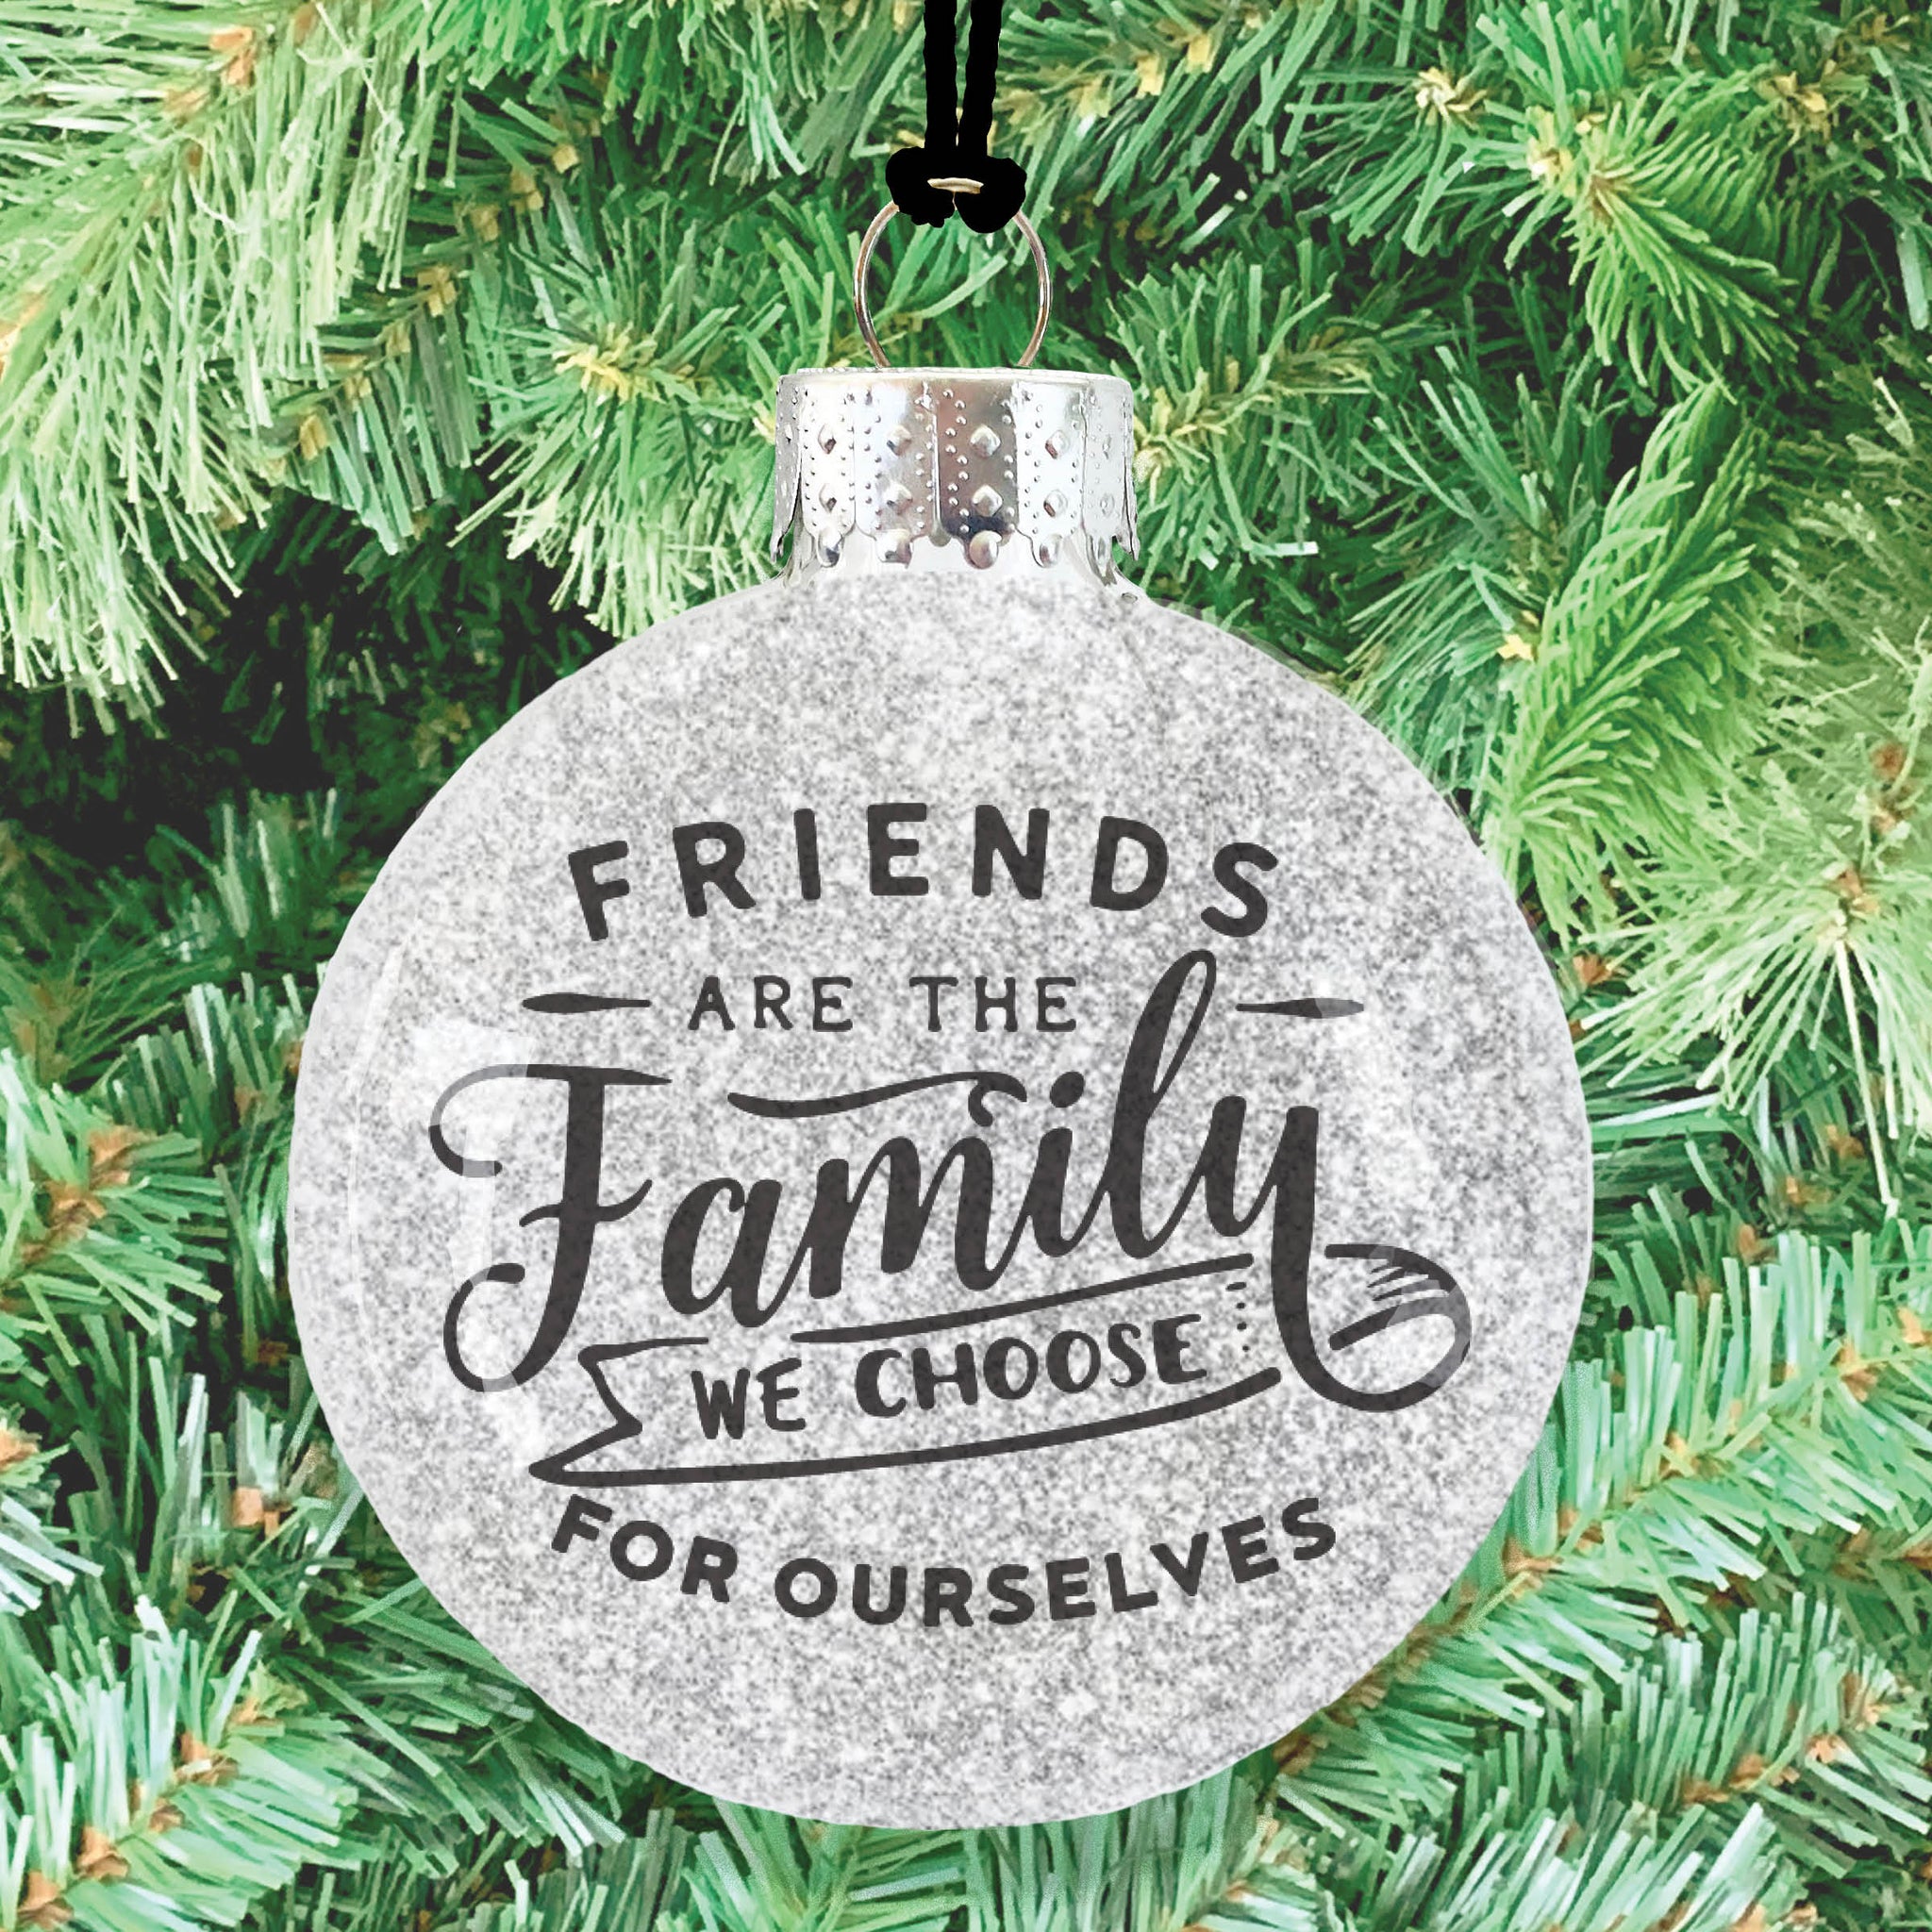 family we choose (with silver glitter!)